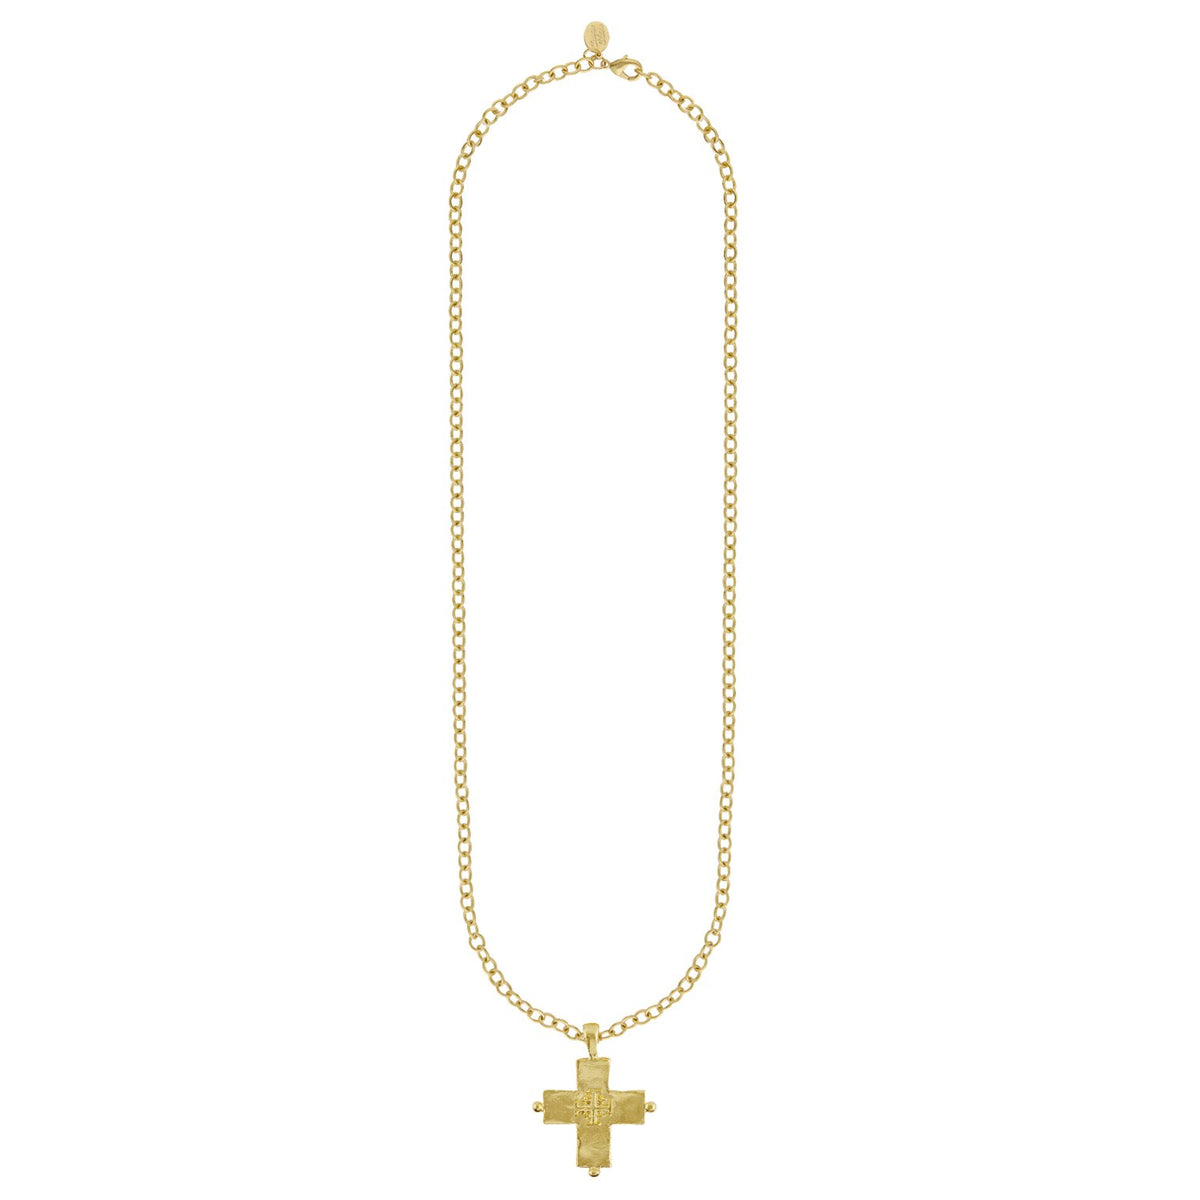 LIFETIME JEWELRY Extra Large Fine Filigree Crucifix Necklaces for Women &  Men 24k Real Gold Plated (XL Fine Filigree Crucifix) | Amazon.com